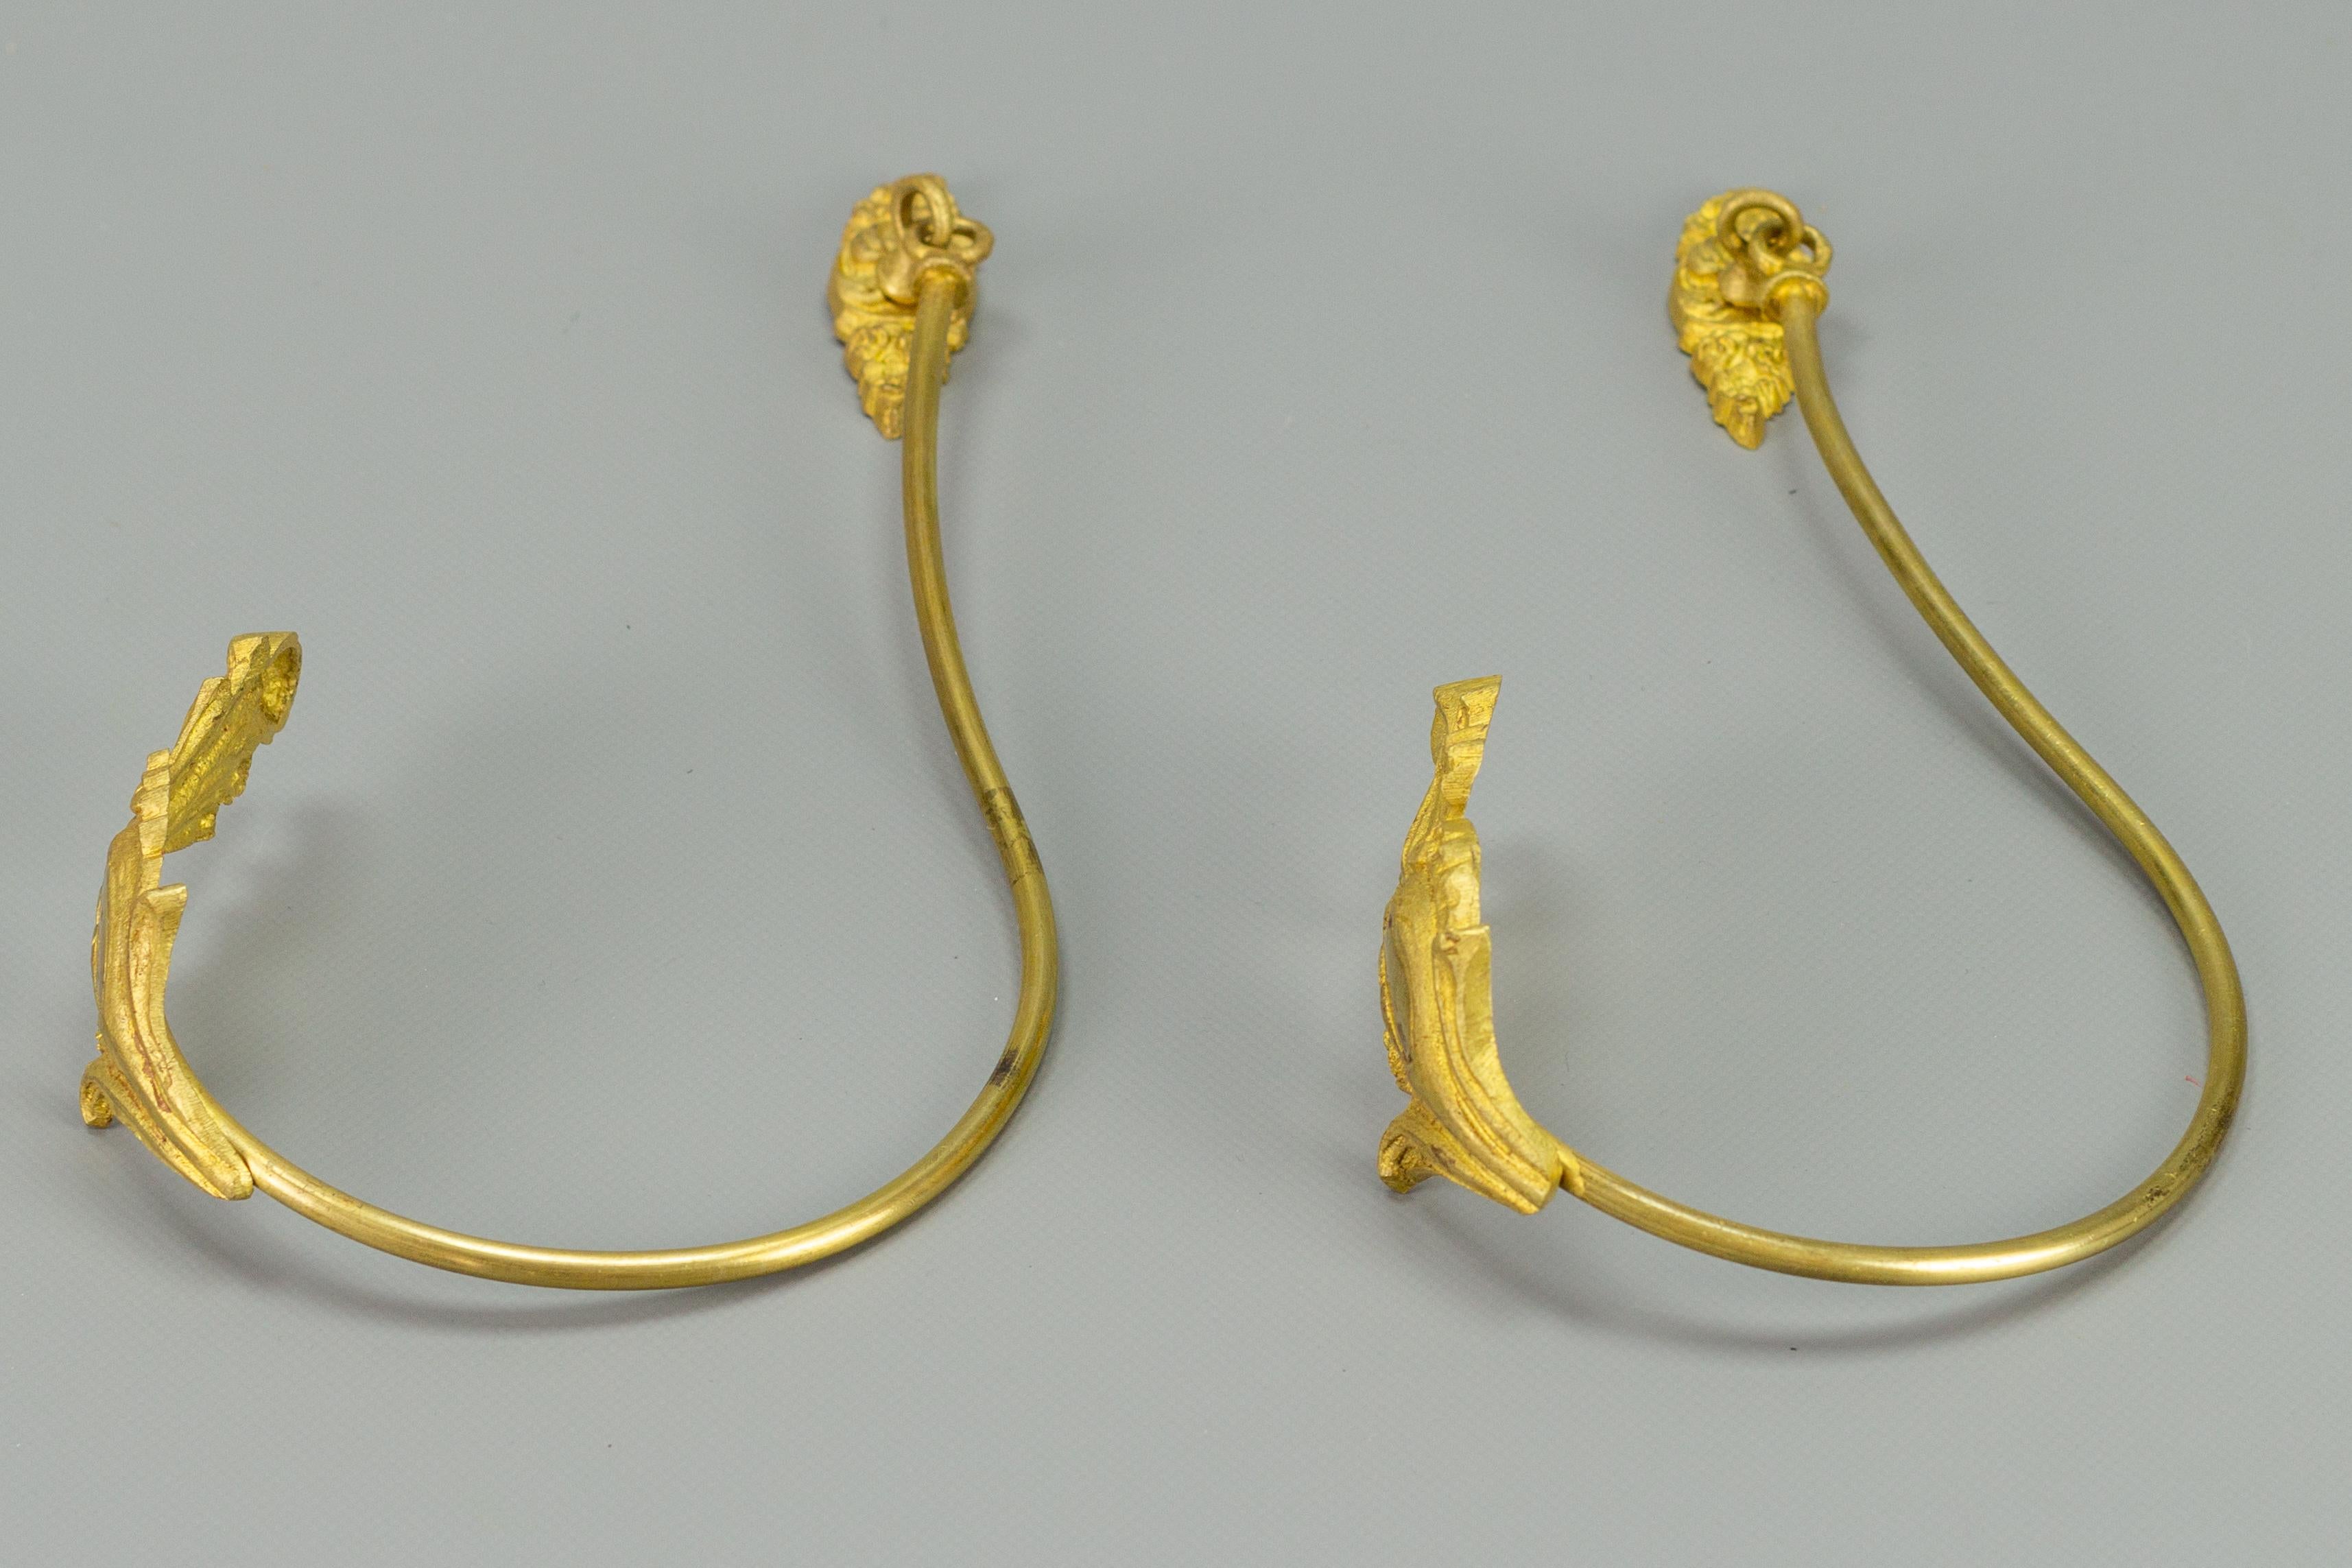 Early 20th Century Pair of French Gilt Bronze and Brass Curtain Tiebacks or Curtain Holders